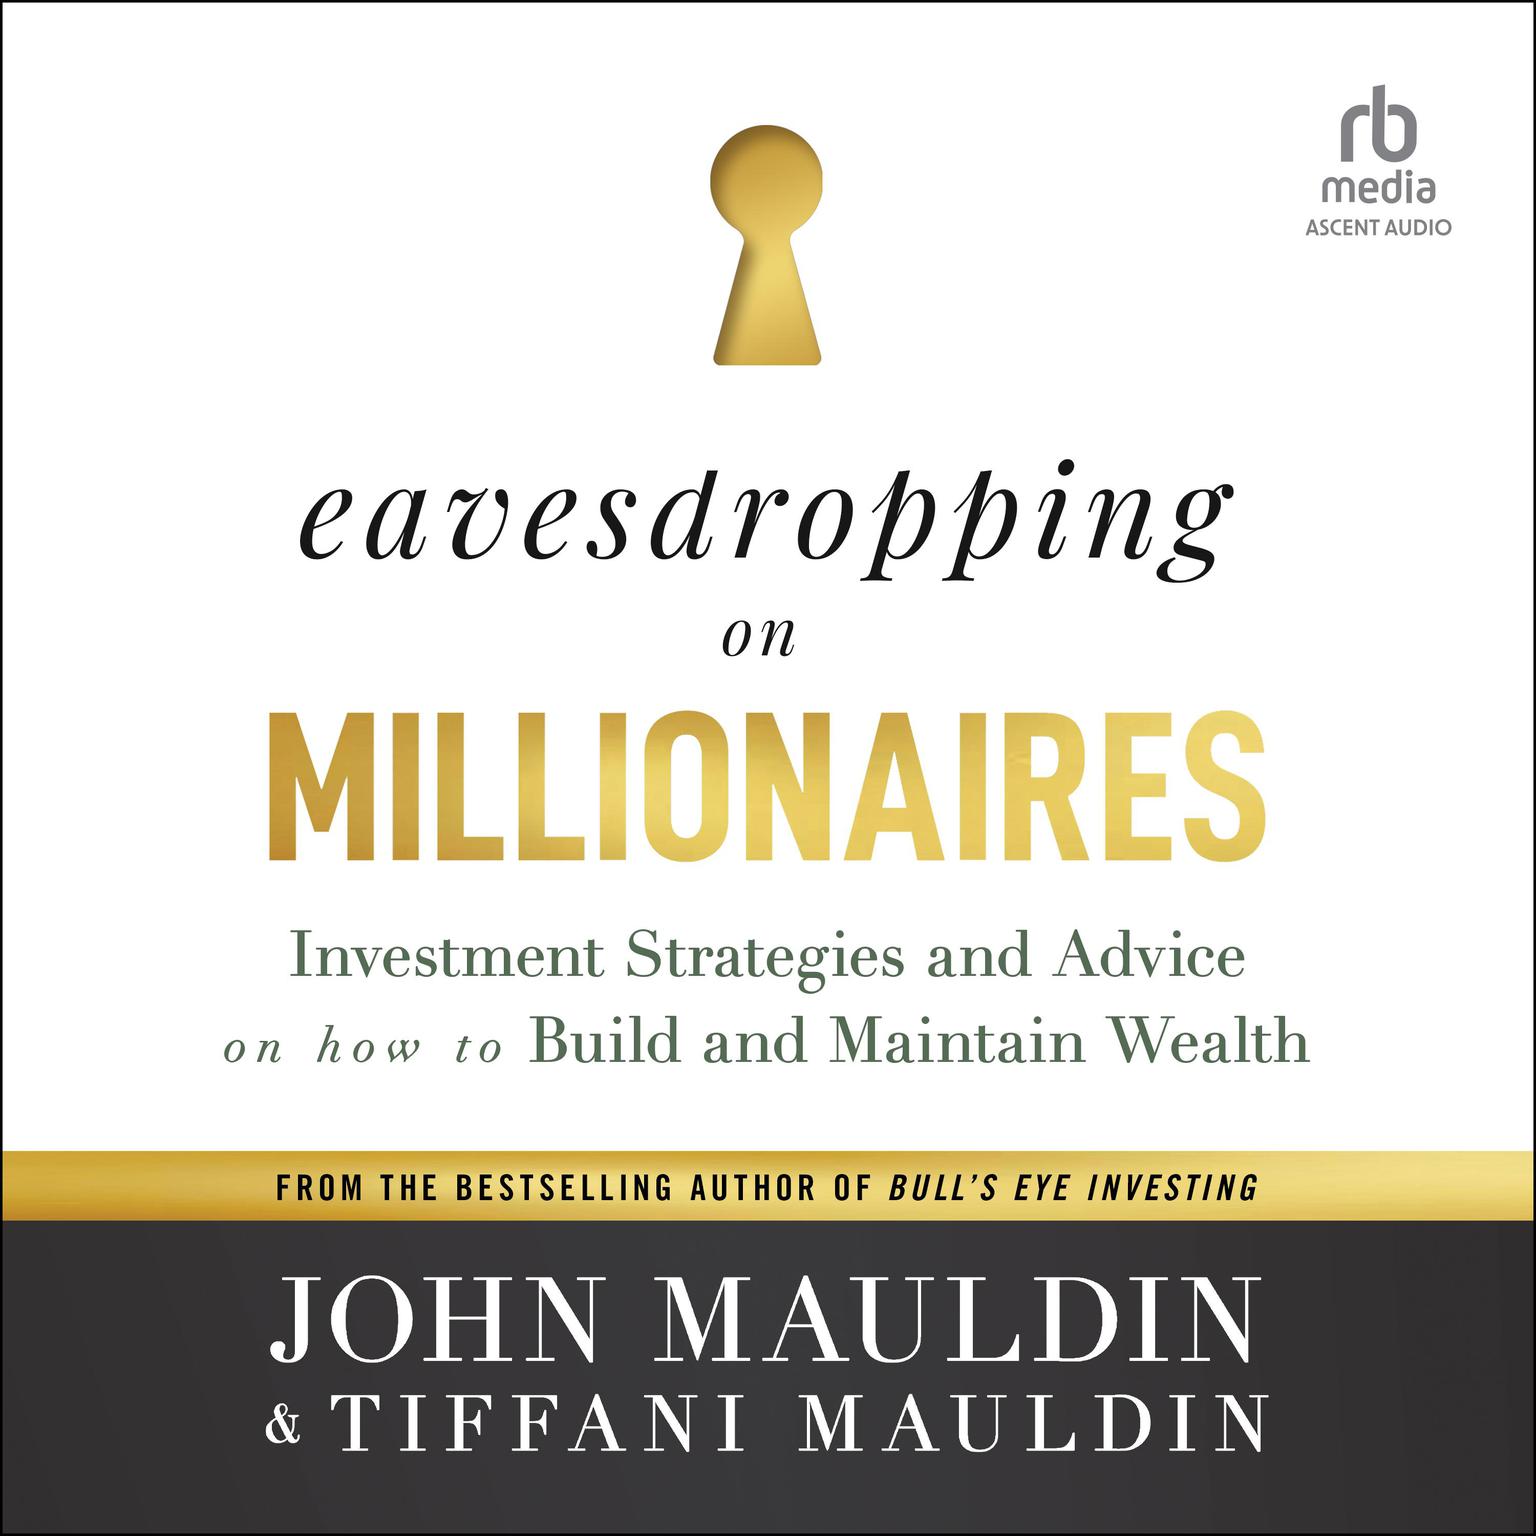 Eavesdropping on Millionaires: Investment Strategies and Advice on How to Build and Maintain Wealth Audiobook, by John Mauldin